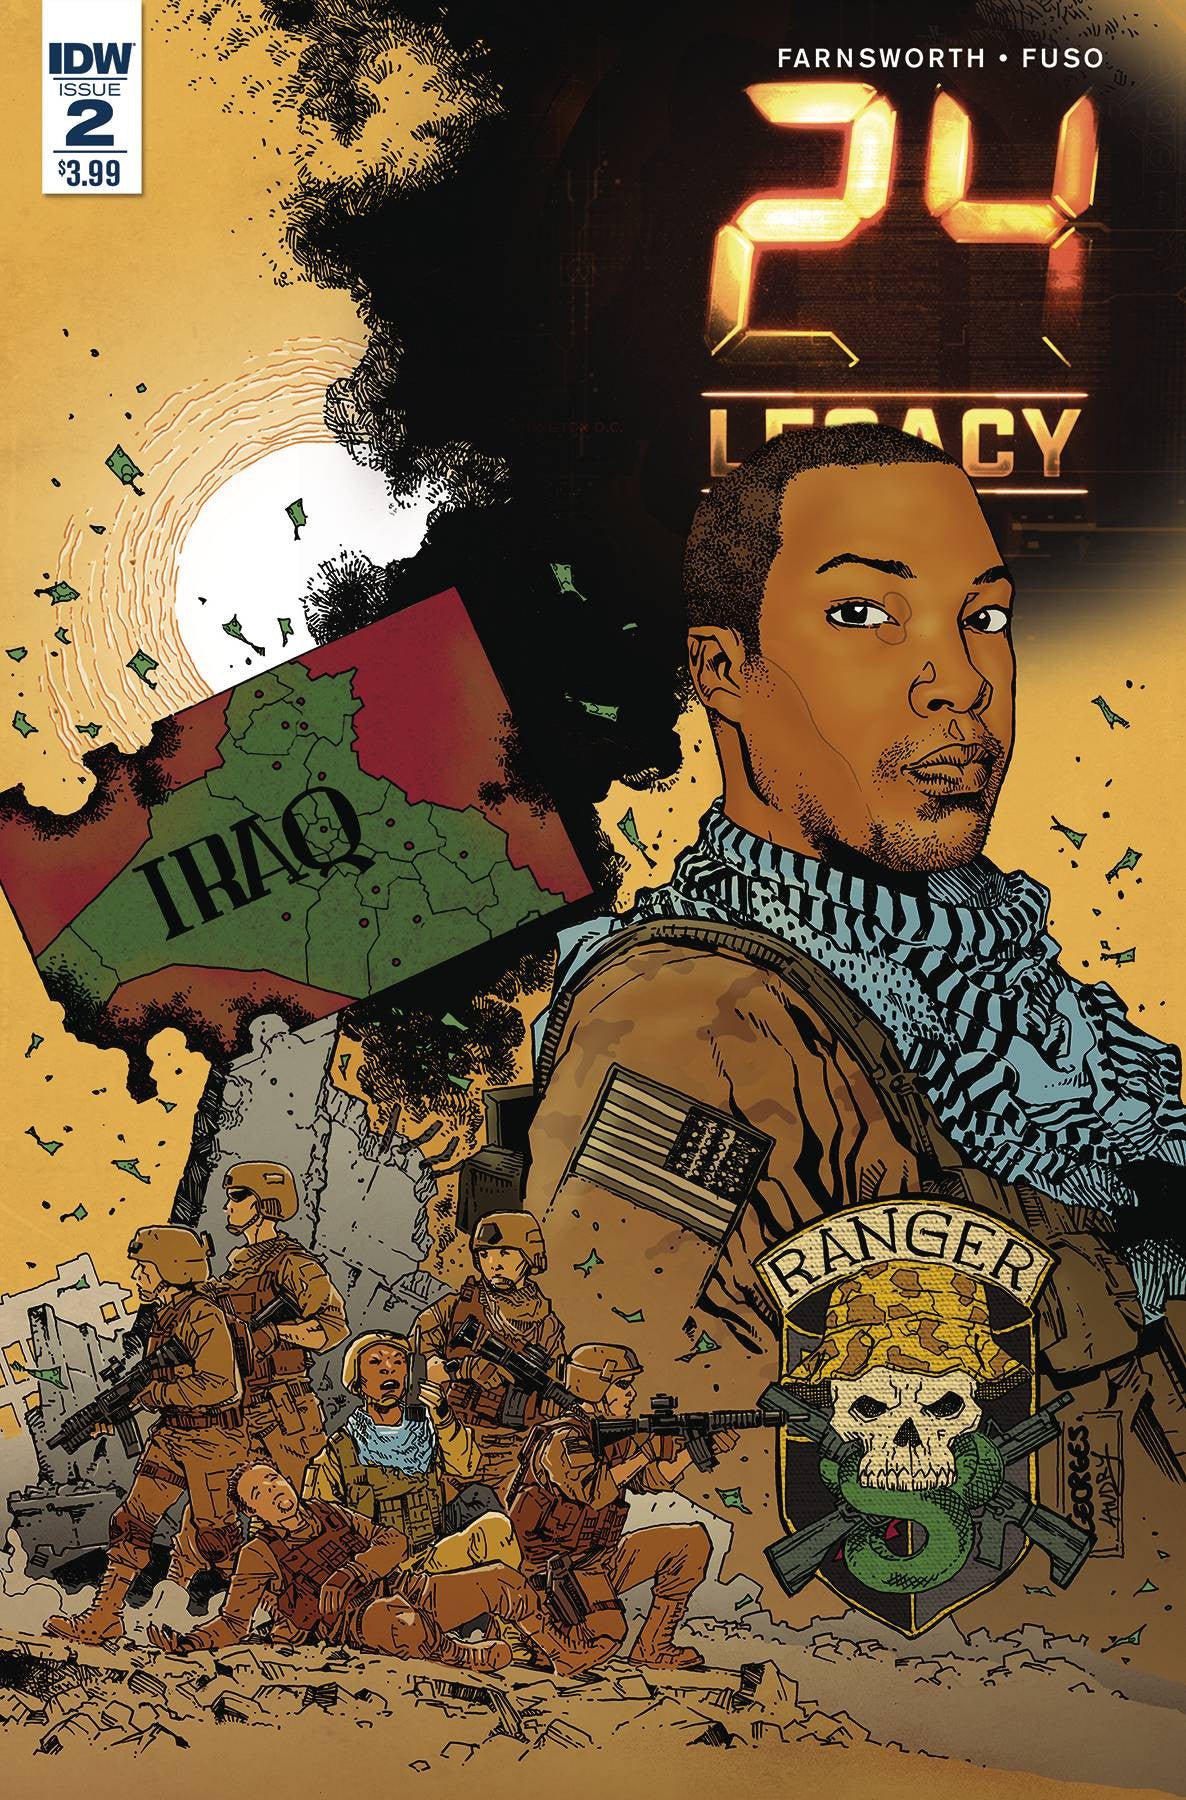 24 LEGACY RULES OF ENGAGEMENT #2 (OF 5) COVER